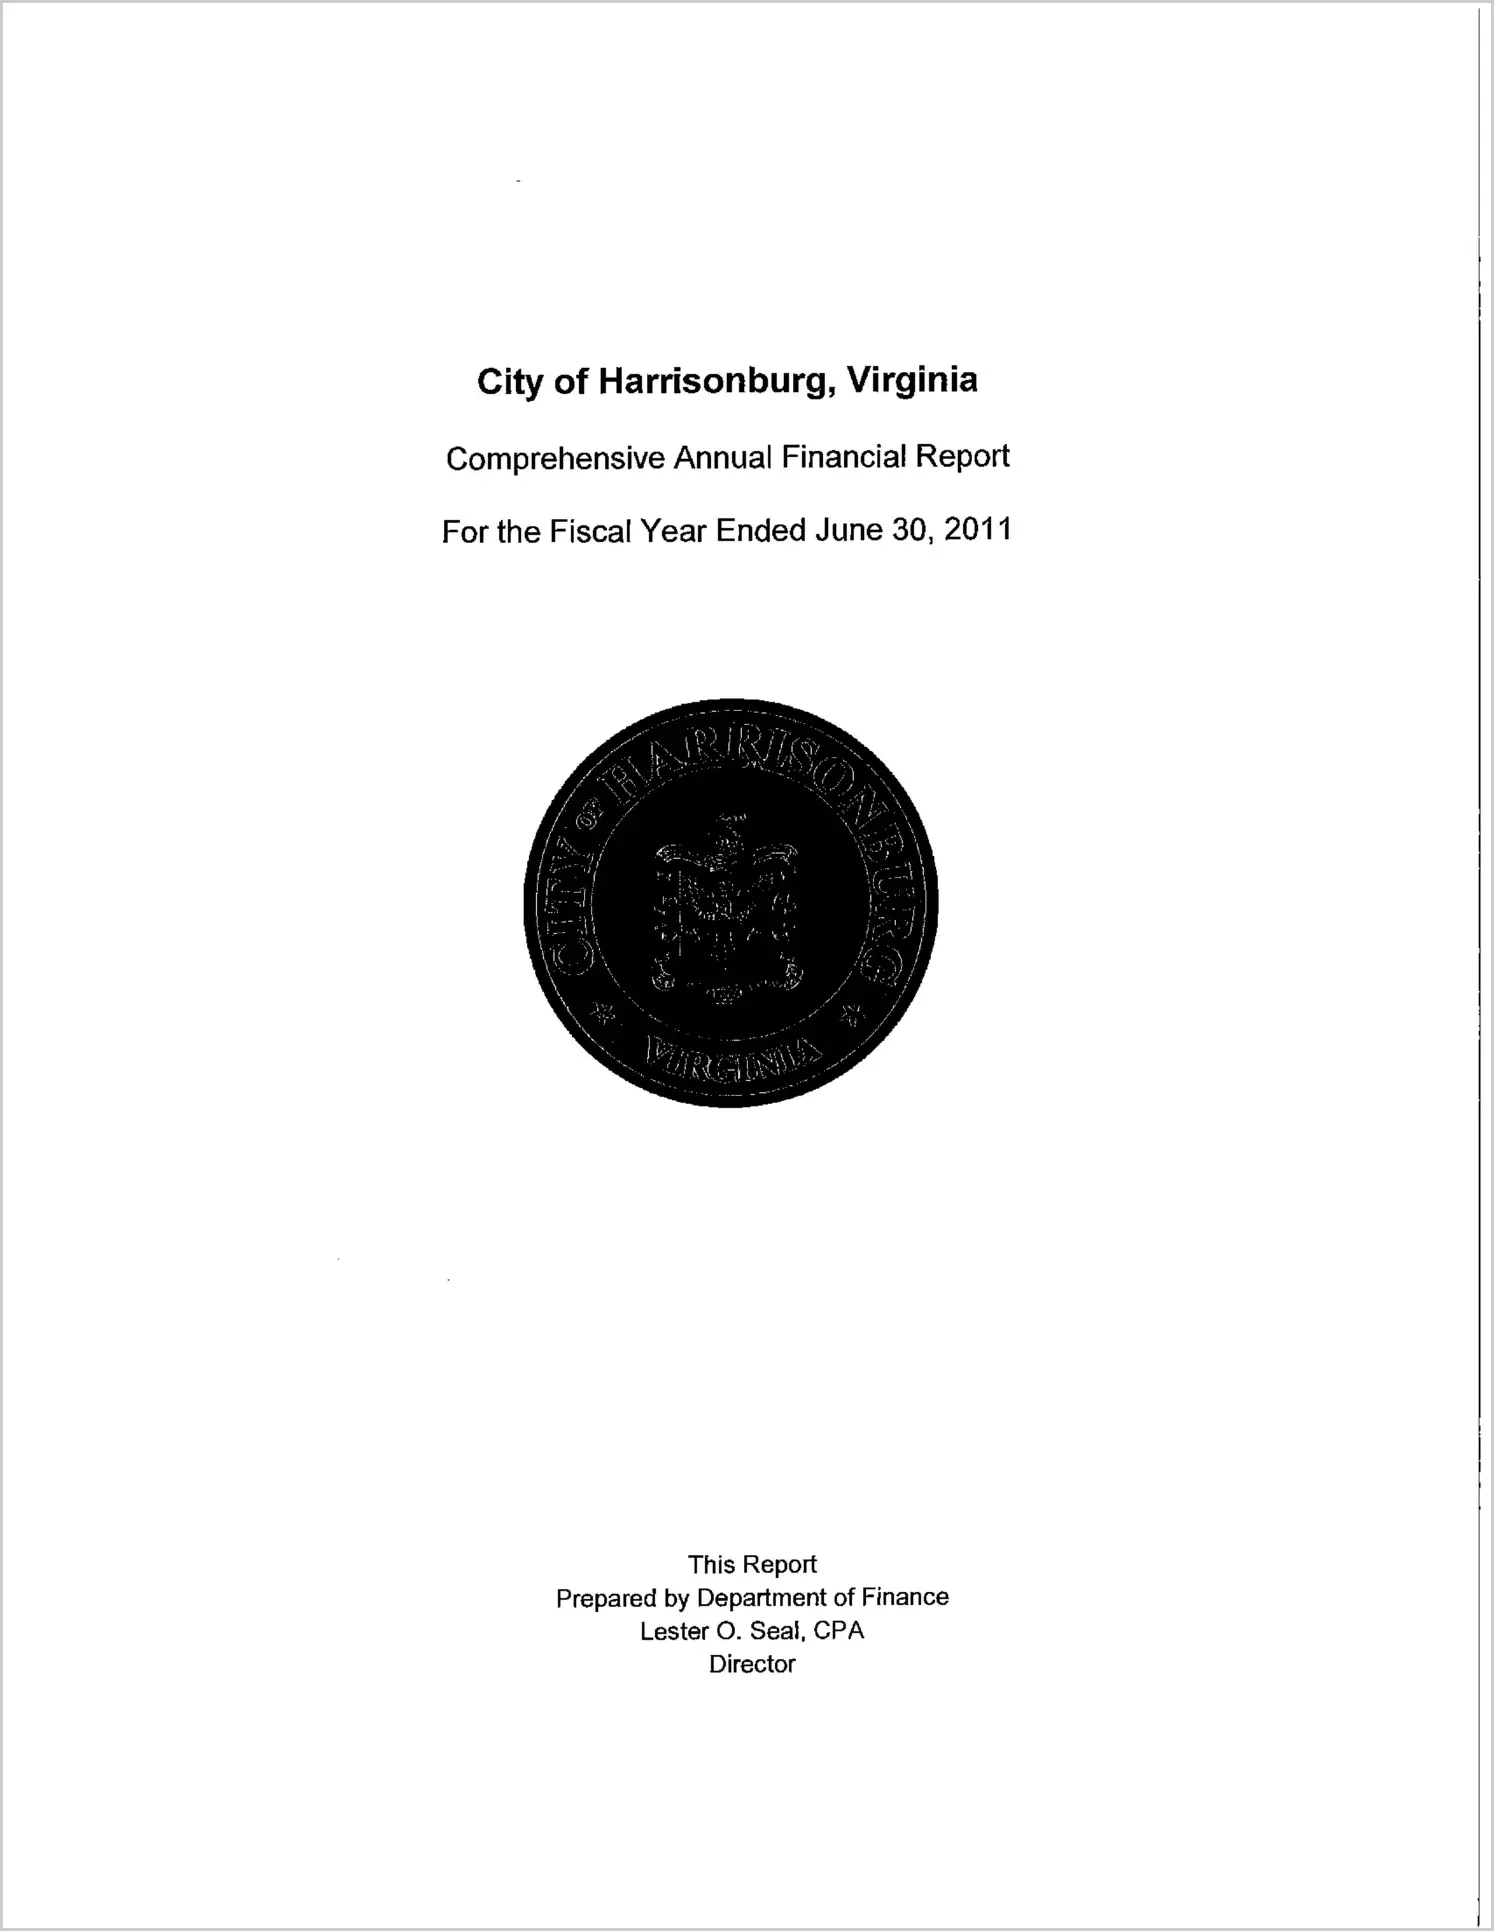 2011 Annual Financial Report for City of Harrisonburg